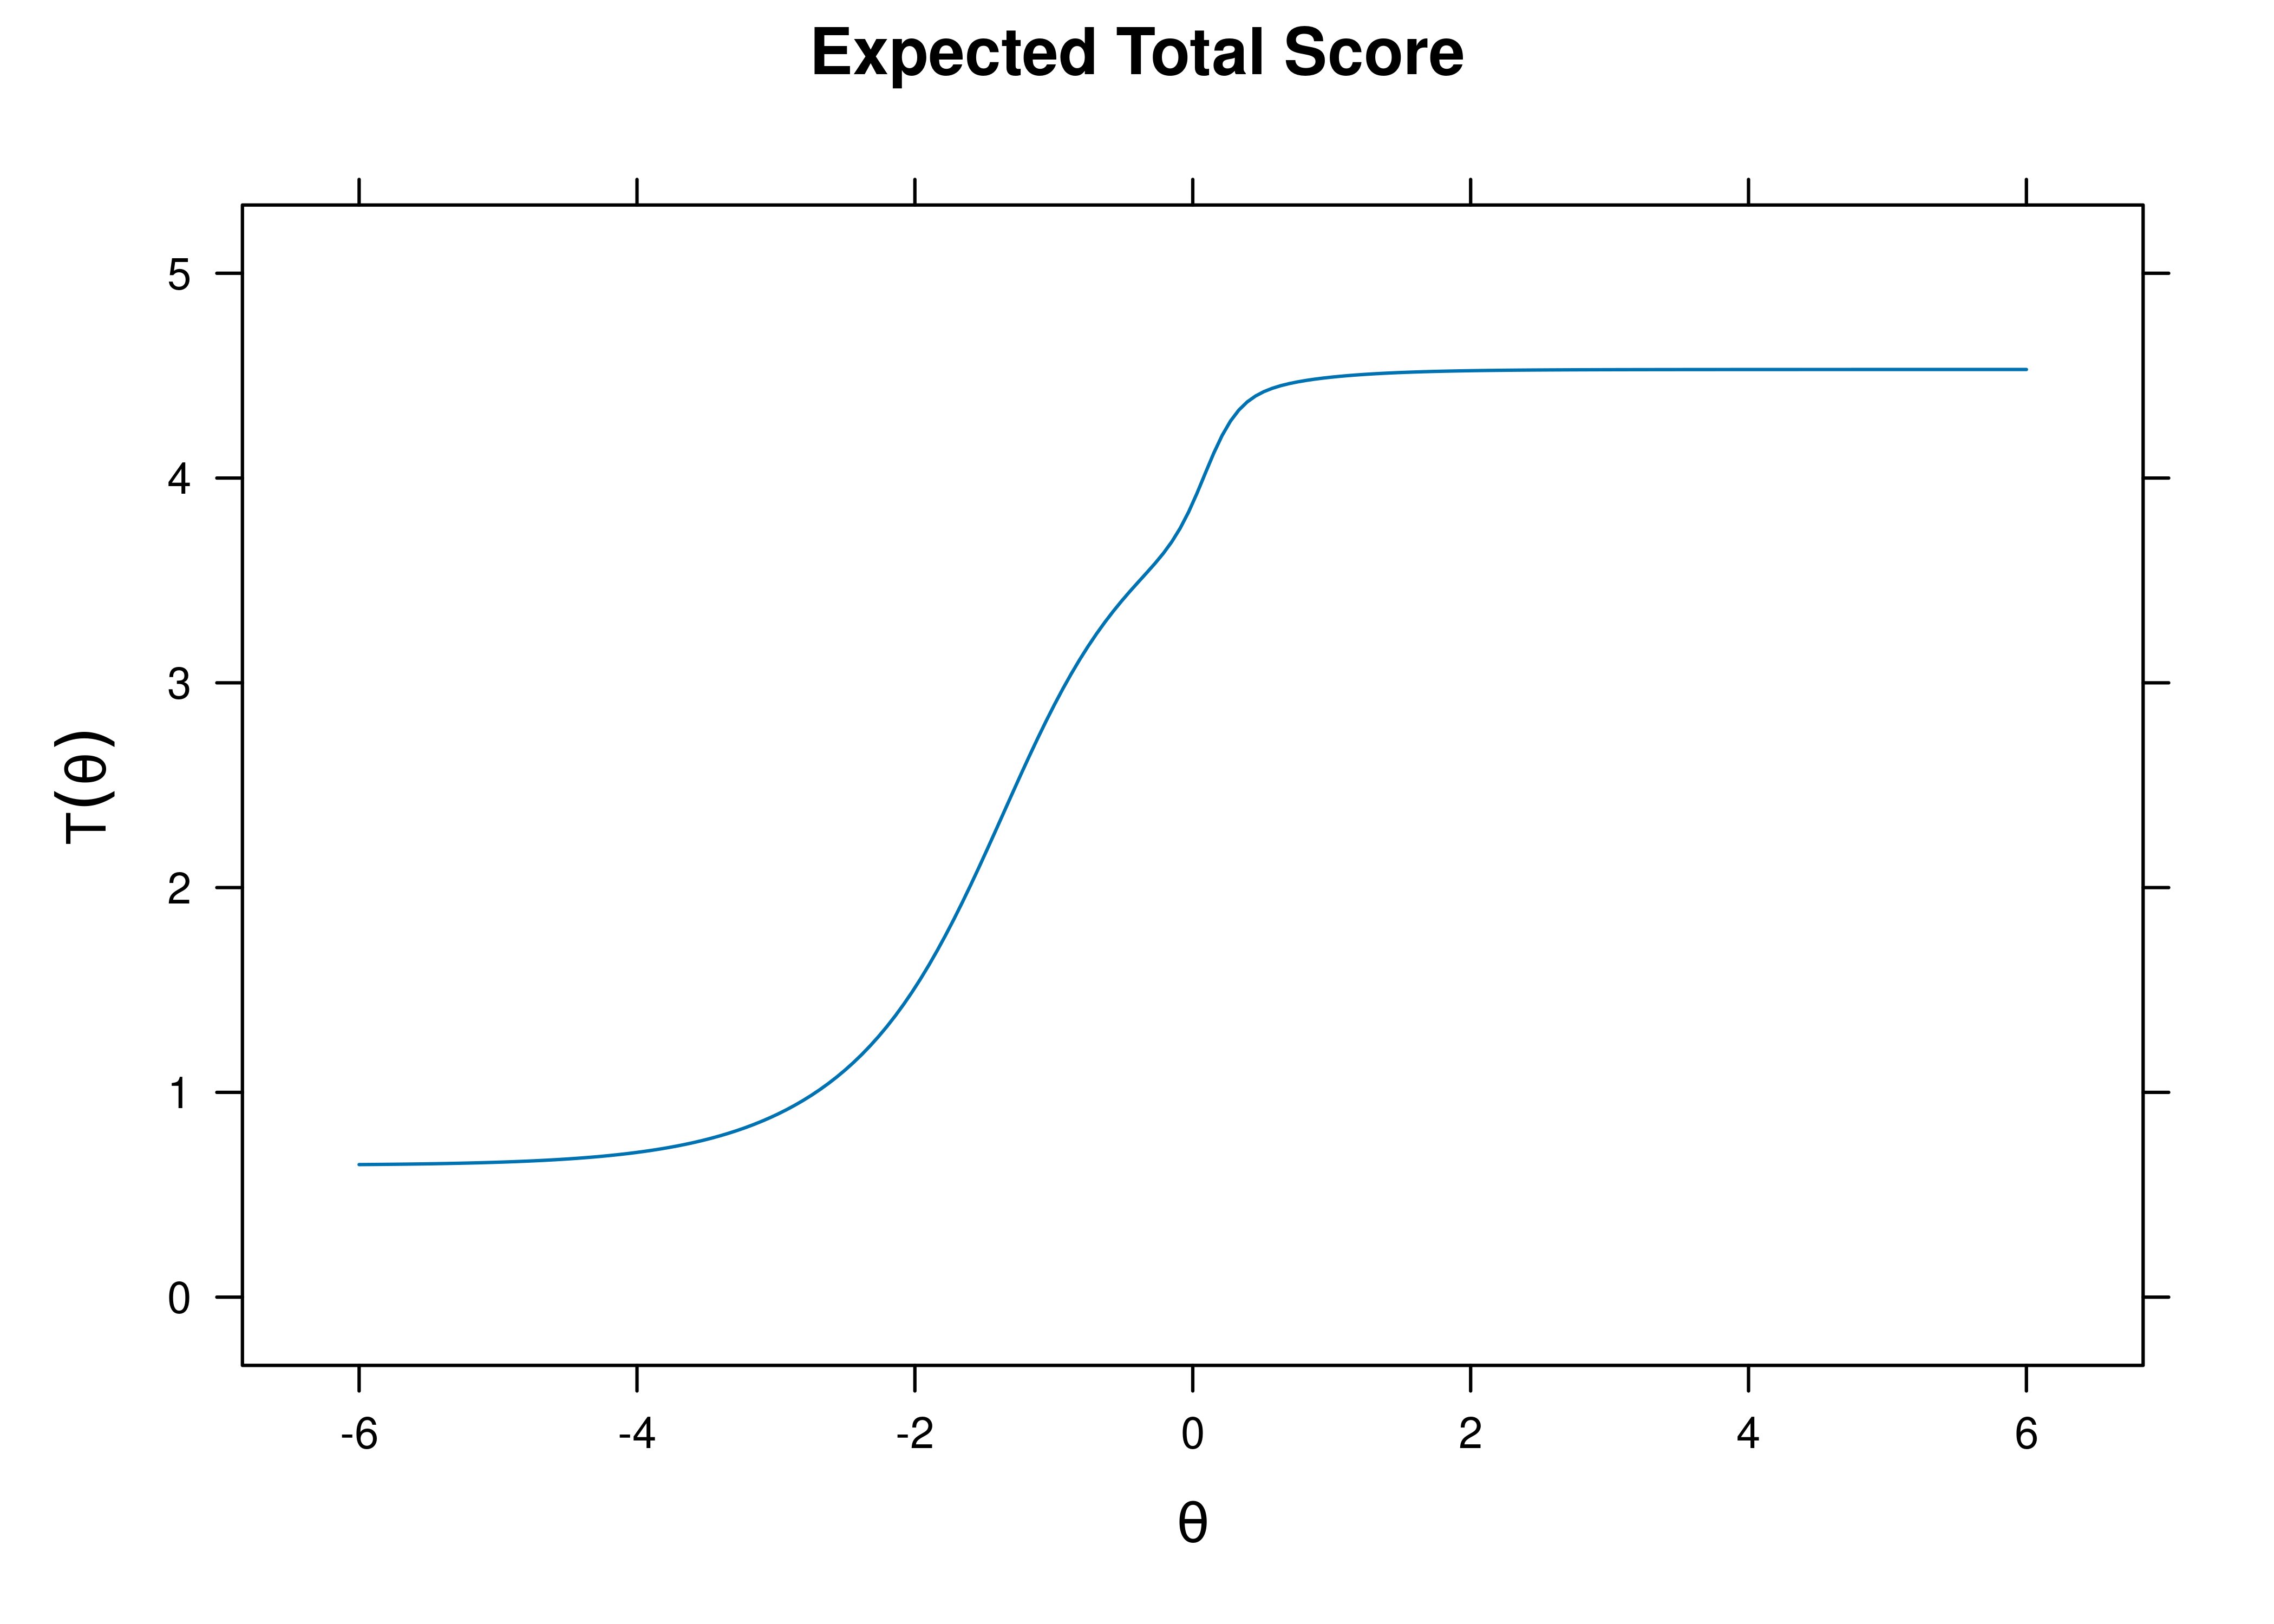 Test Characteristic Curve From Four-Parameter Logistic Item Response Theory Model.